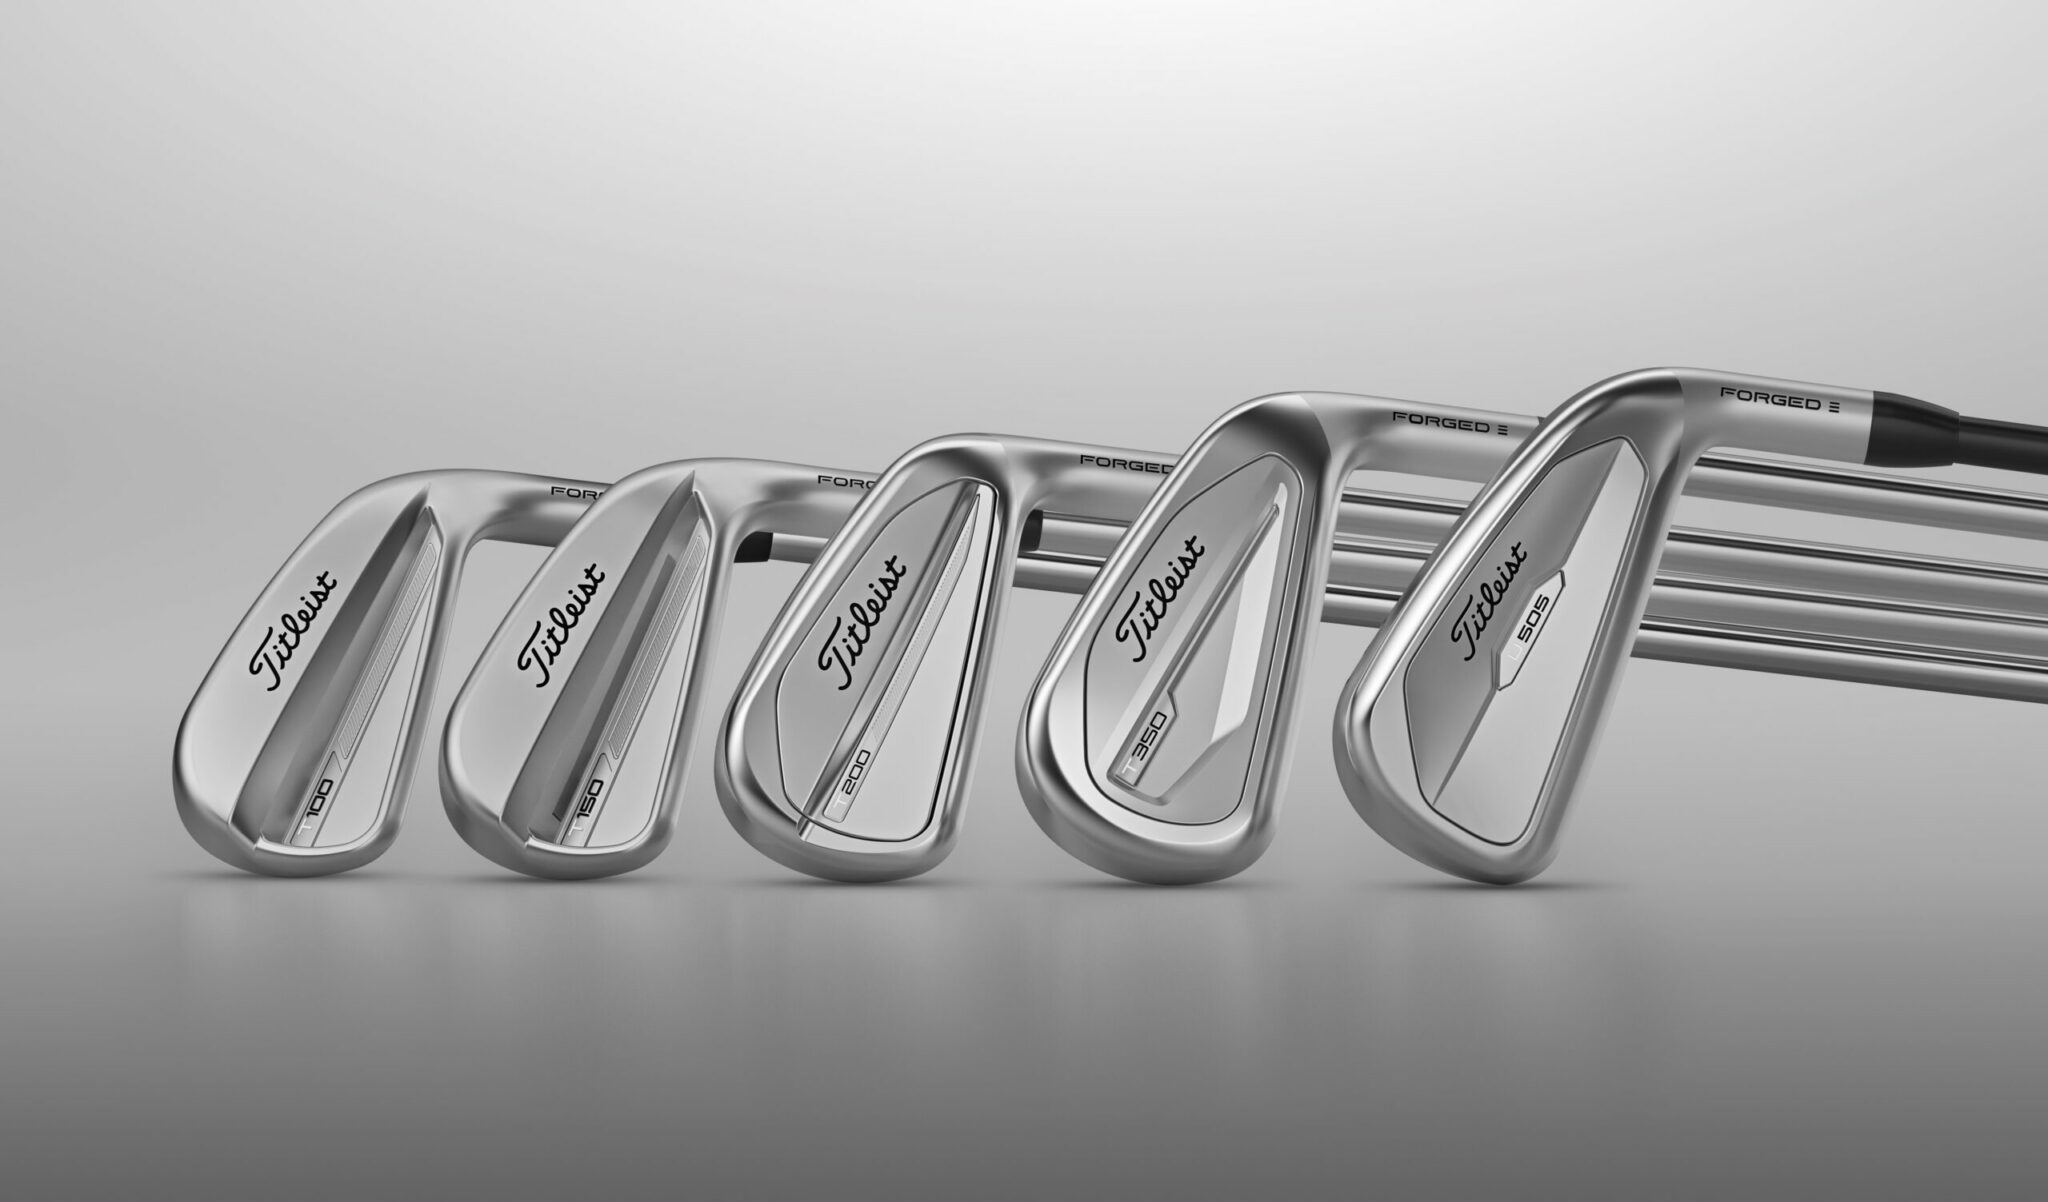 Titleist T-series irons + U505 and T200 utilities